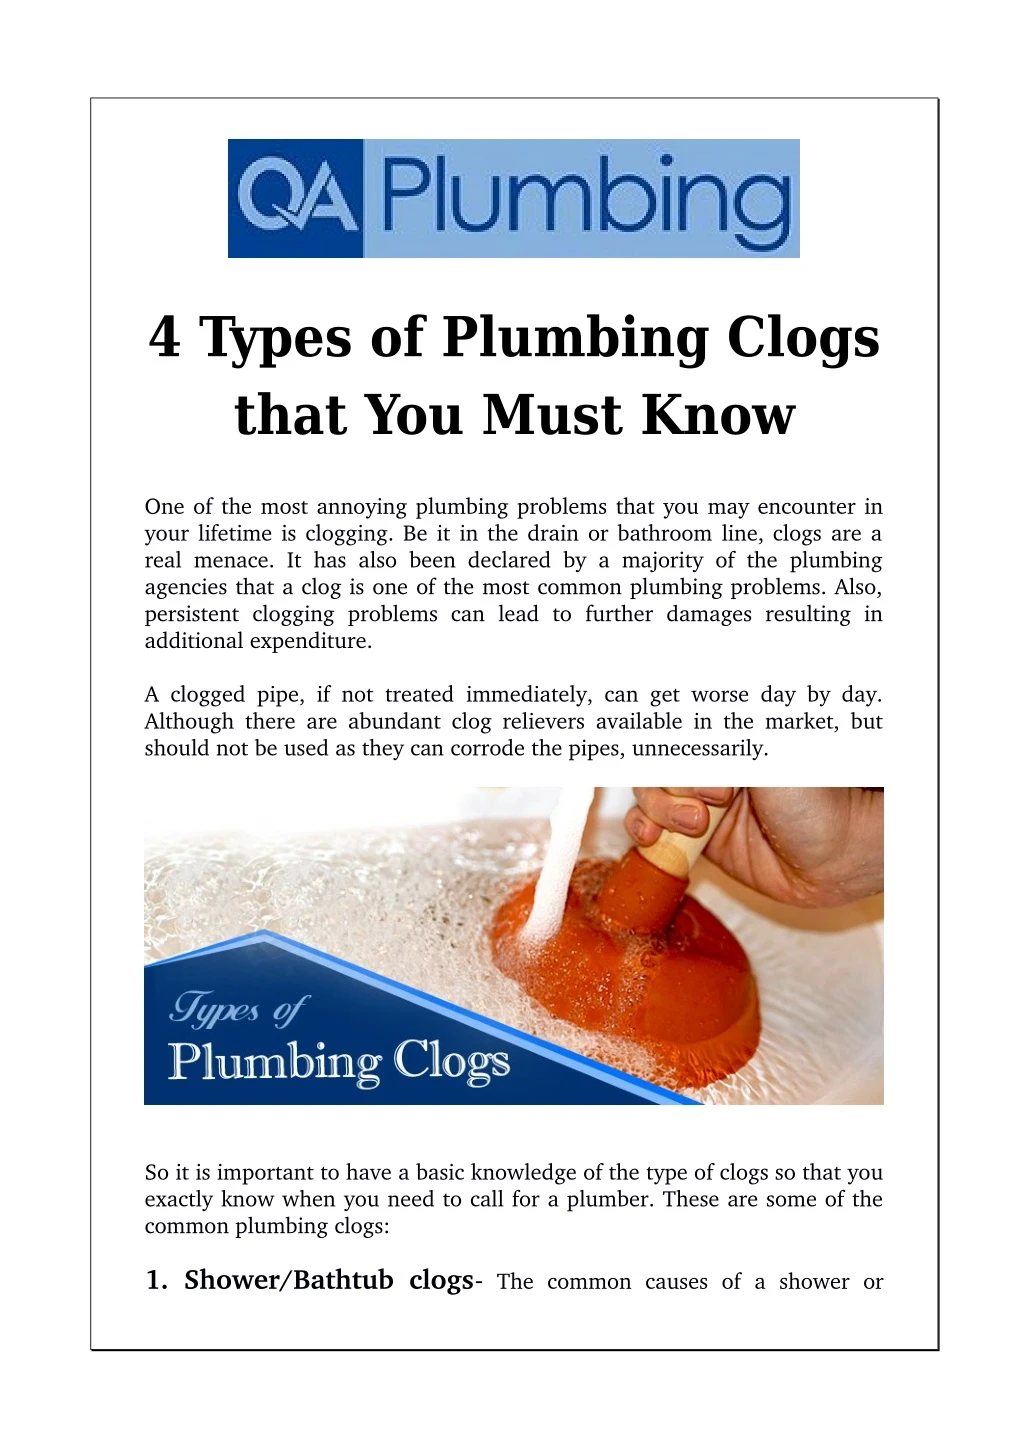 4 types of plumbing clogs that you must know